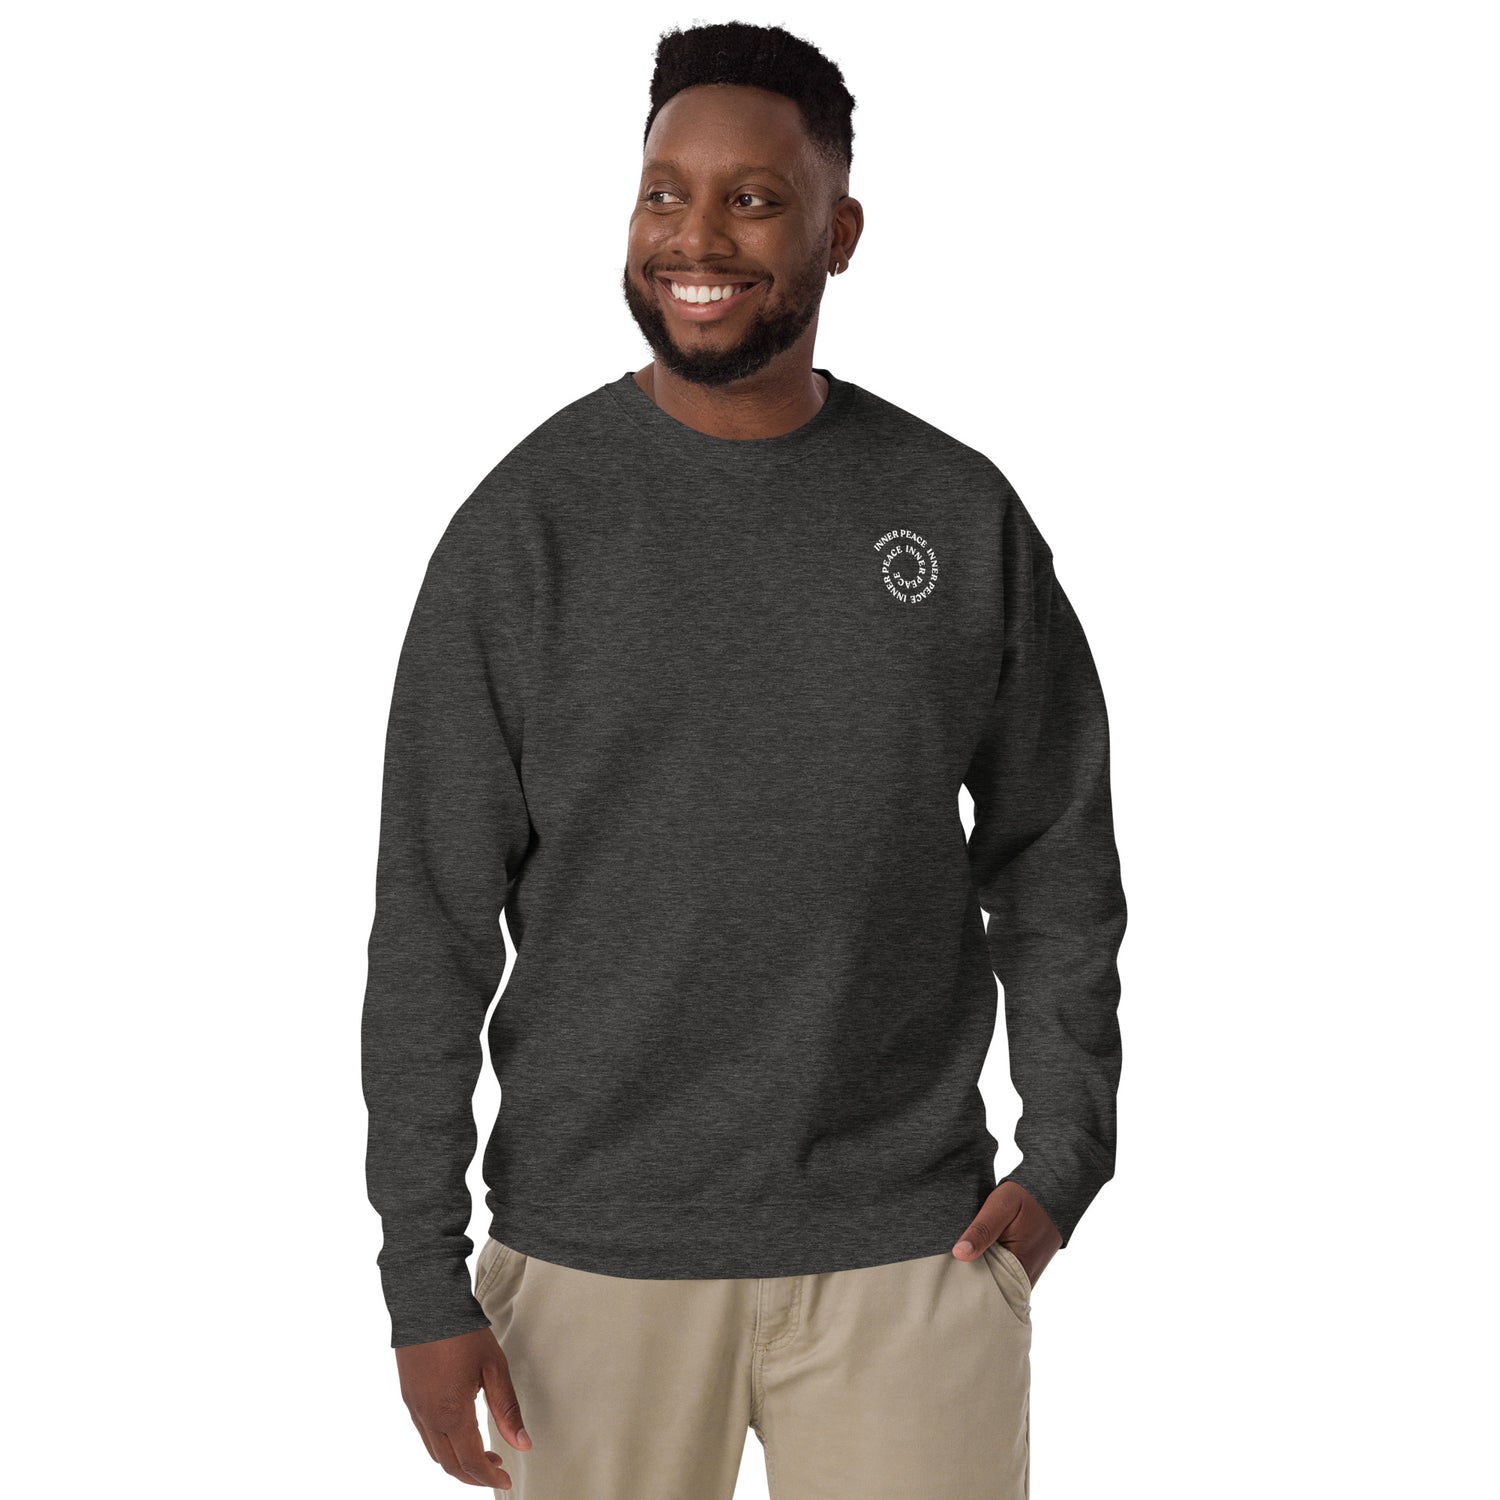 Charcoal Crewneck Sweatshirt that helps feel better every day with "Inner peace". 